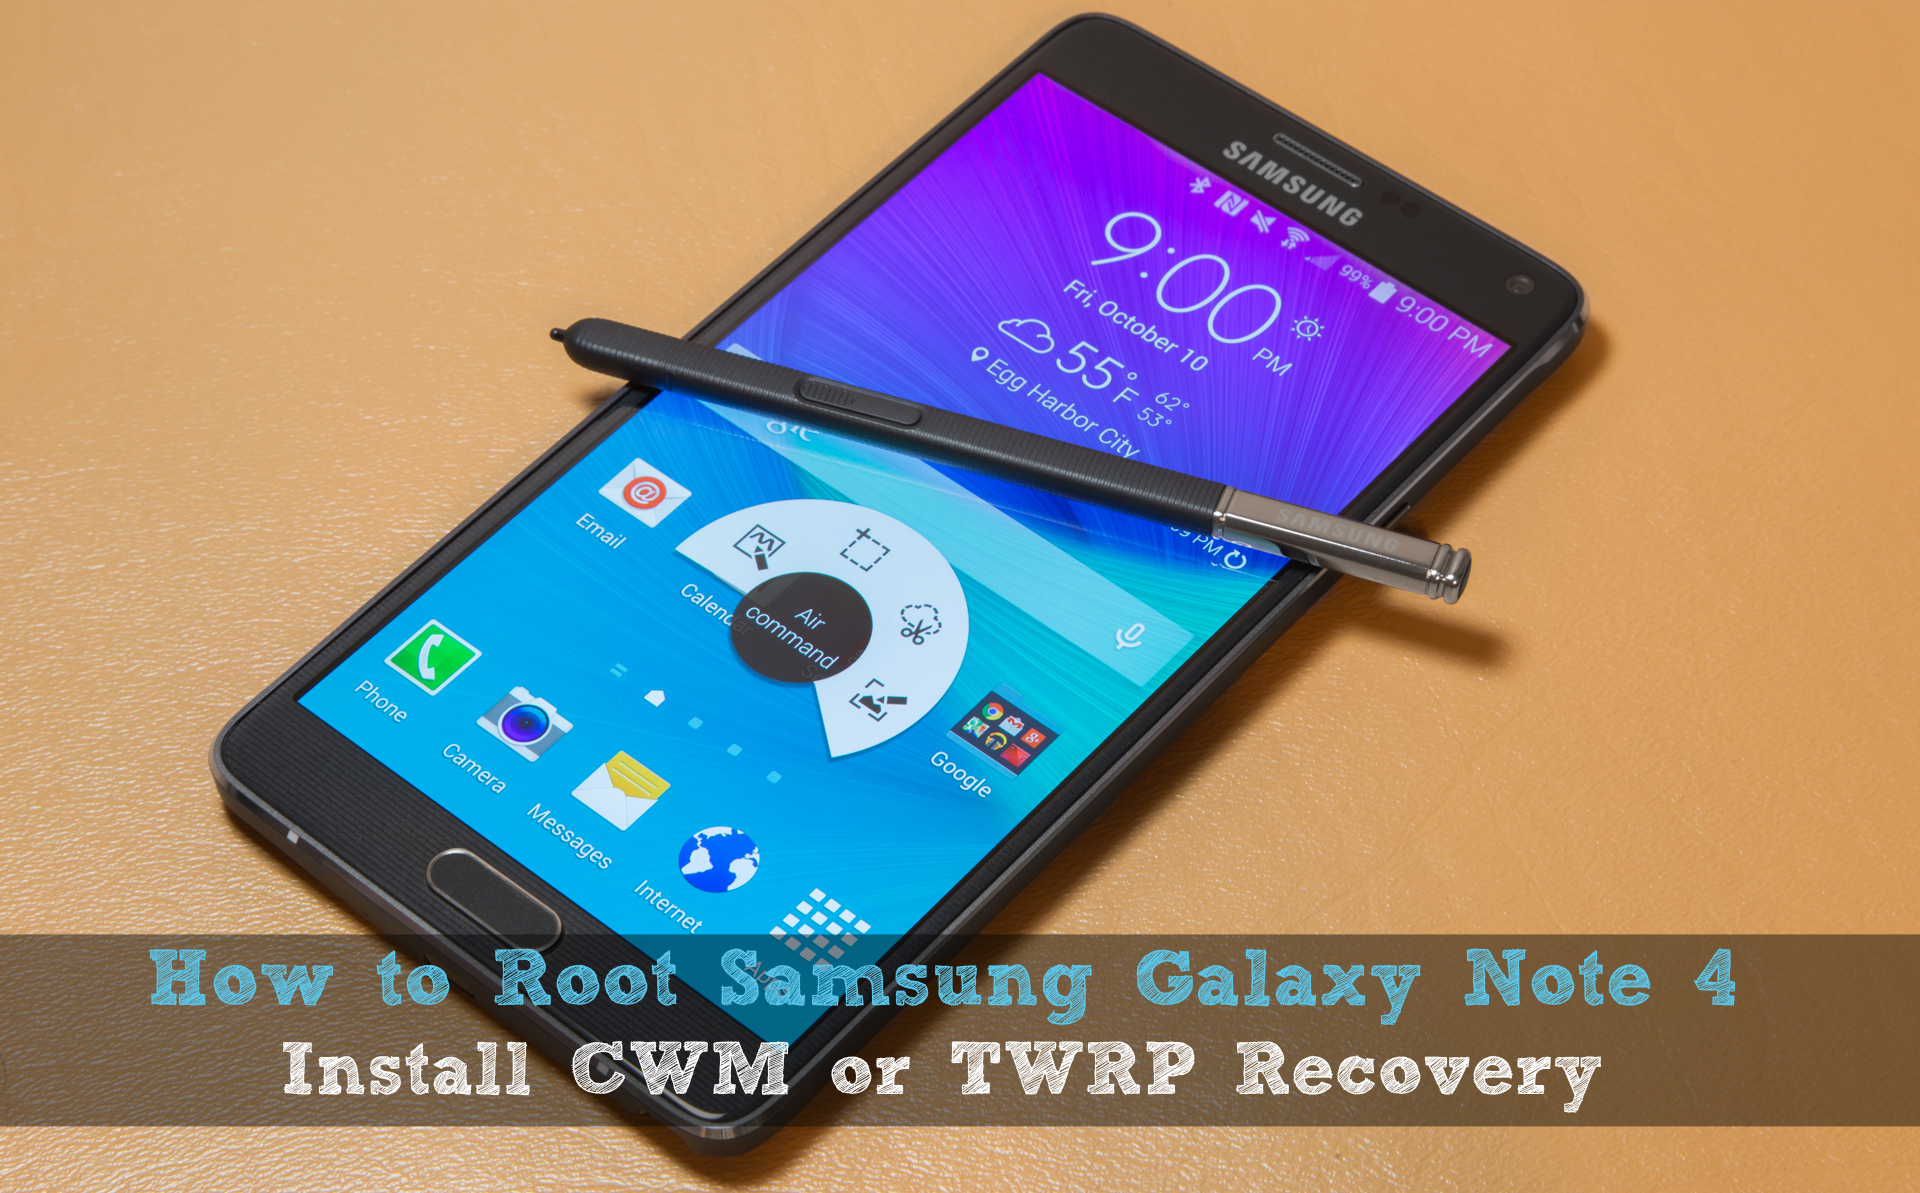 How to root Samsung Galaxy note 4 and install CWM or TWRP recovery